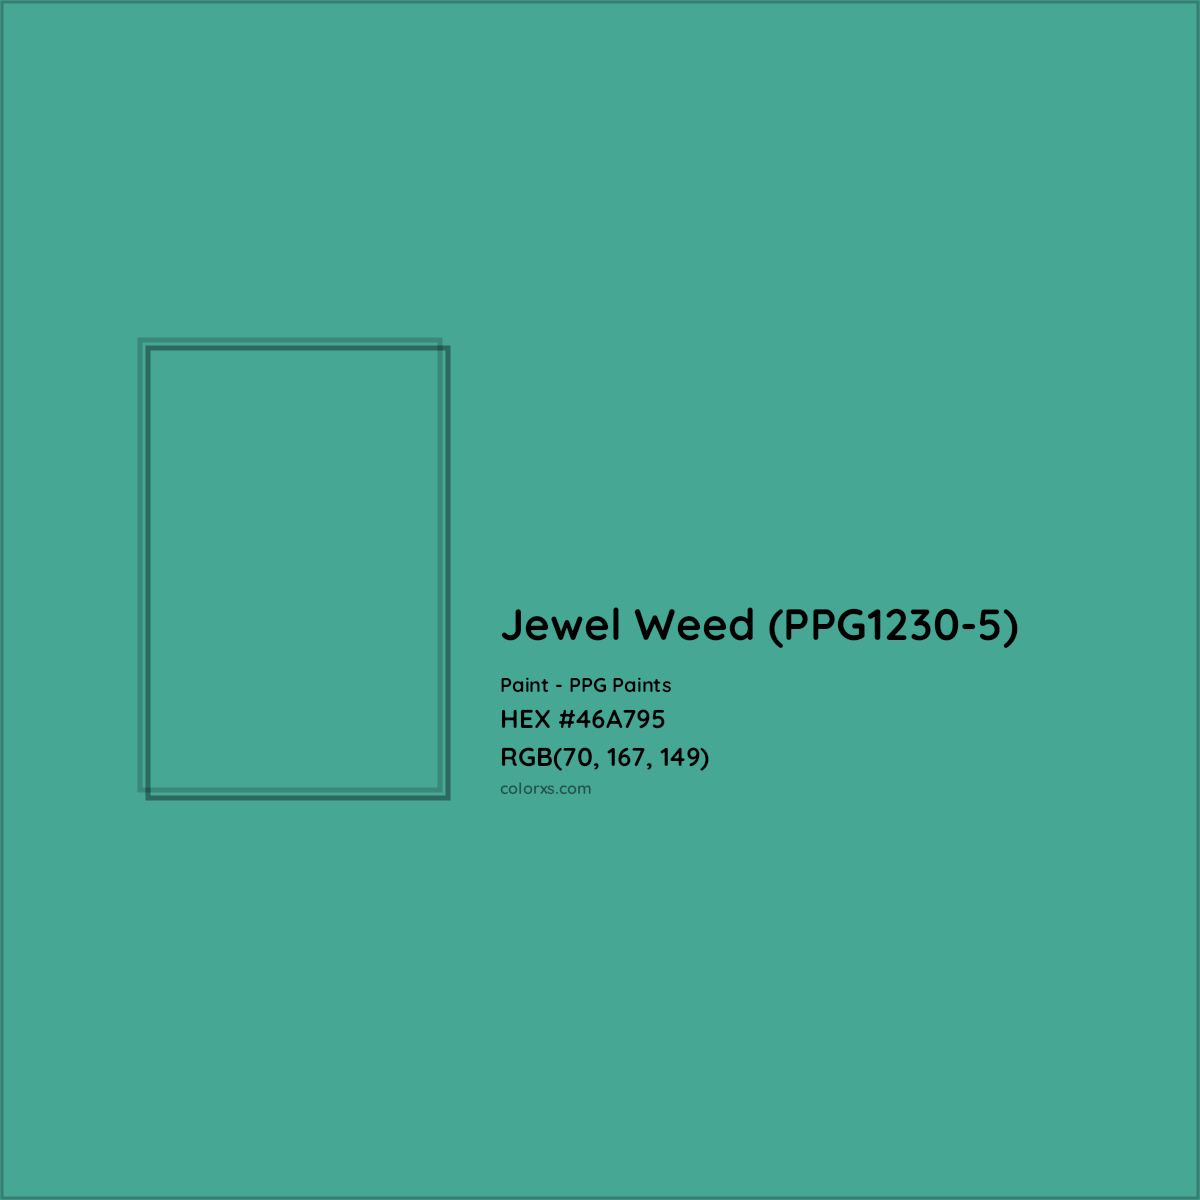 HEX #46A795 Jewel Weed (PPG1230-5) Paint PPG Paints - Color Code